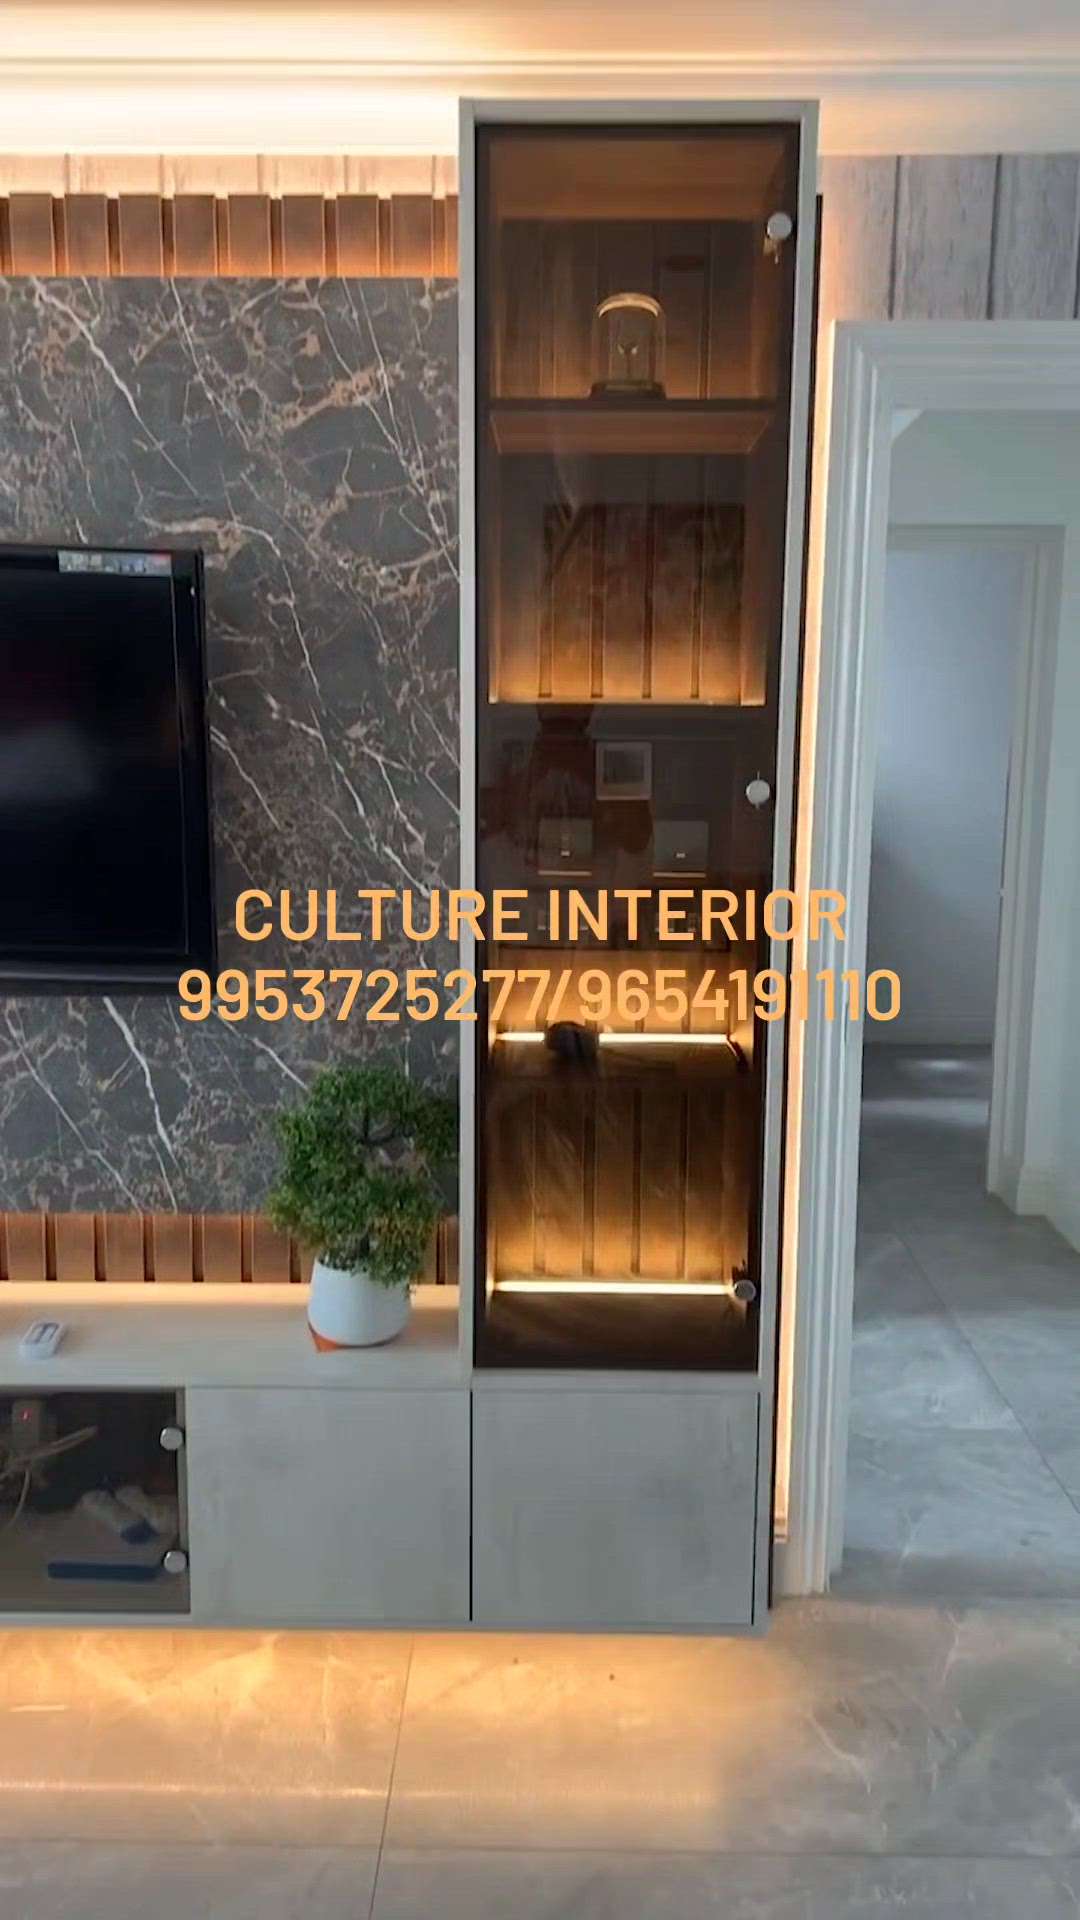 Find here the best home interiors and get design your Entire Home Including your ✓Livingroom ✓Bedroom ✓Kitchen ✓Bathroom and everything.
.
.
.
contact us  9953725277/ 9654191110
Email I'd: cultureinterior2017@gmail.com
Website: www.cultureinterior.in

Please do like ,share & subscribe our you tube channel https://youtube.com/channel/UC9Hm9090aOlJOcszdAb6-PQ
.
.
.
#interiors #interiordesign #interior #design #homedecor #decor #architecture #home #interiordesigner #homedesign #interiorstyling #furniture #interiordecor #decoration #art #luxury #designer #inspiration #interiordecorating #style #homesweethome #livingroom #interiorinspo #furnituredesign #handmade #homestyle #interiorstyle #interiorinspirationss